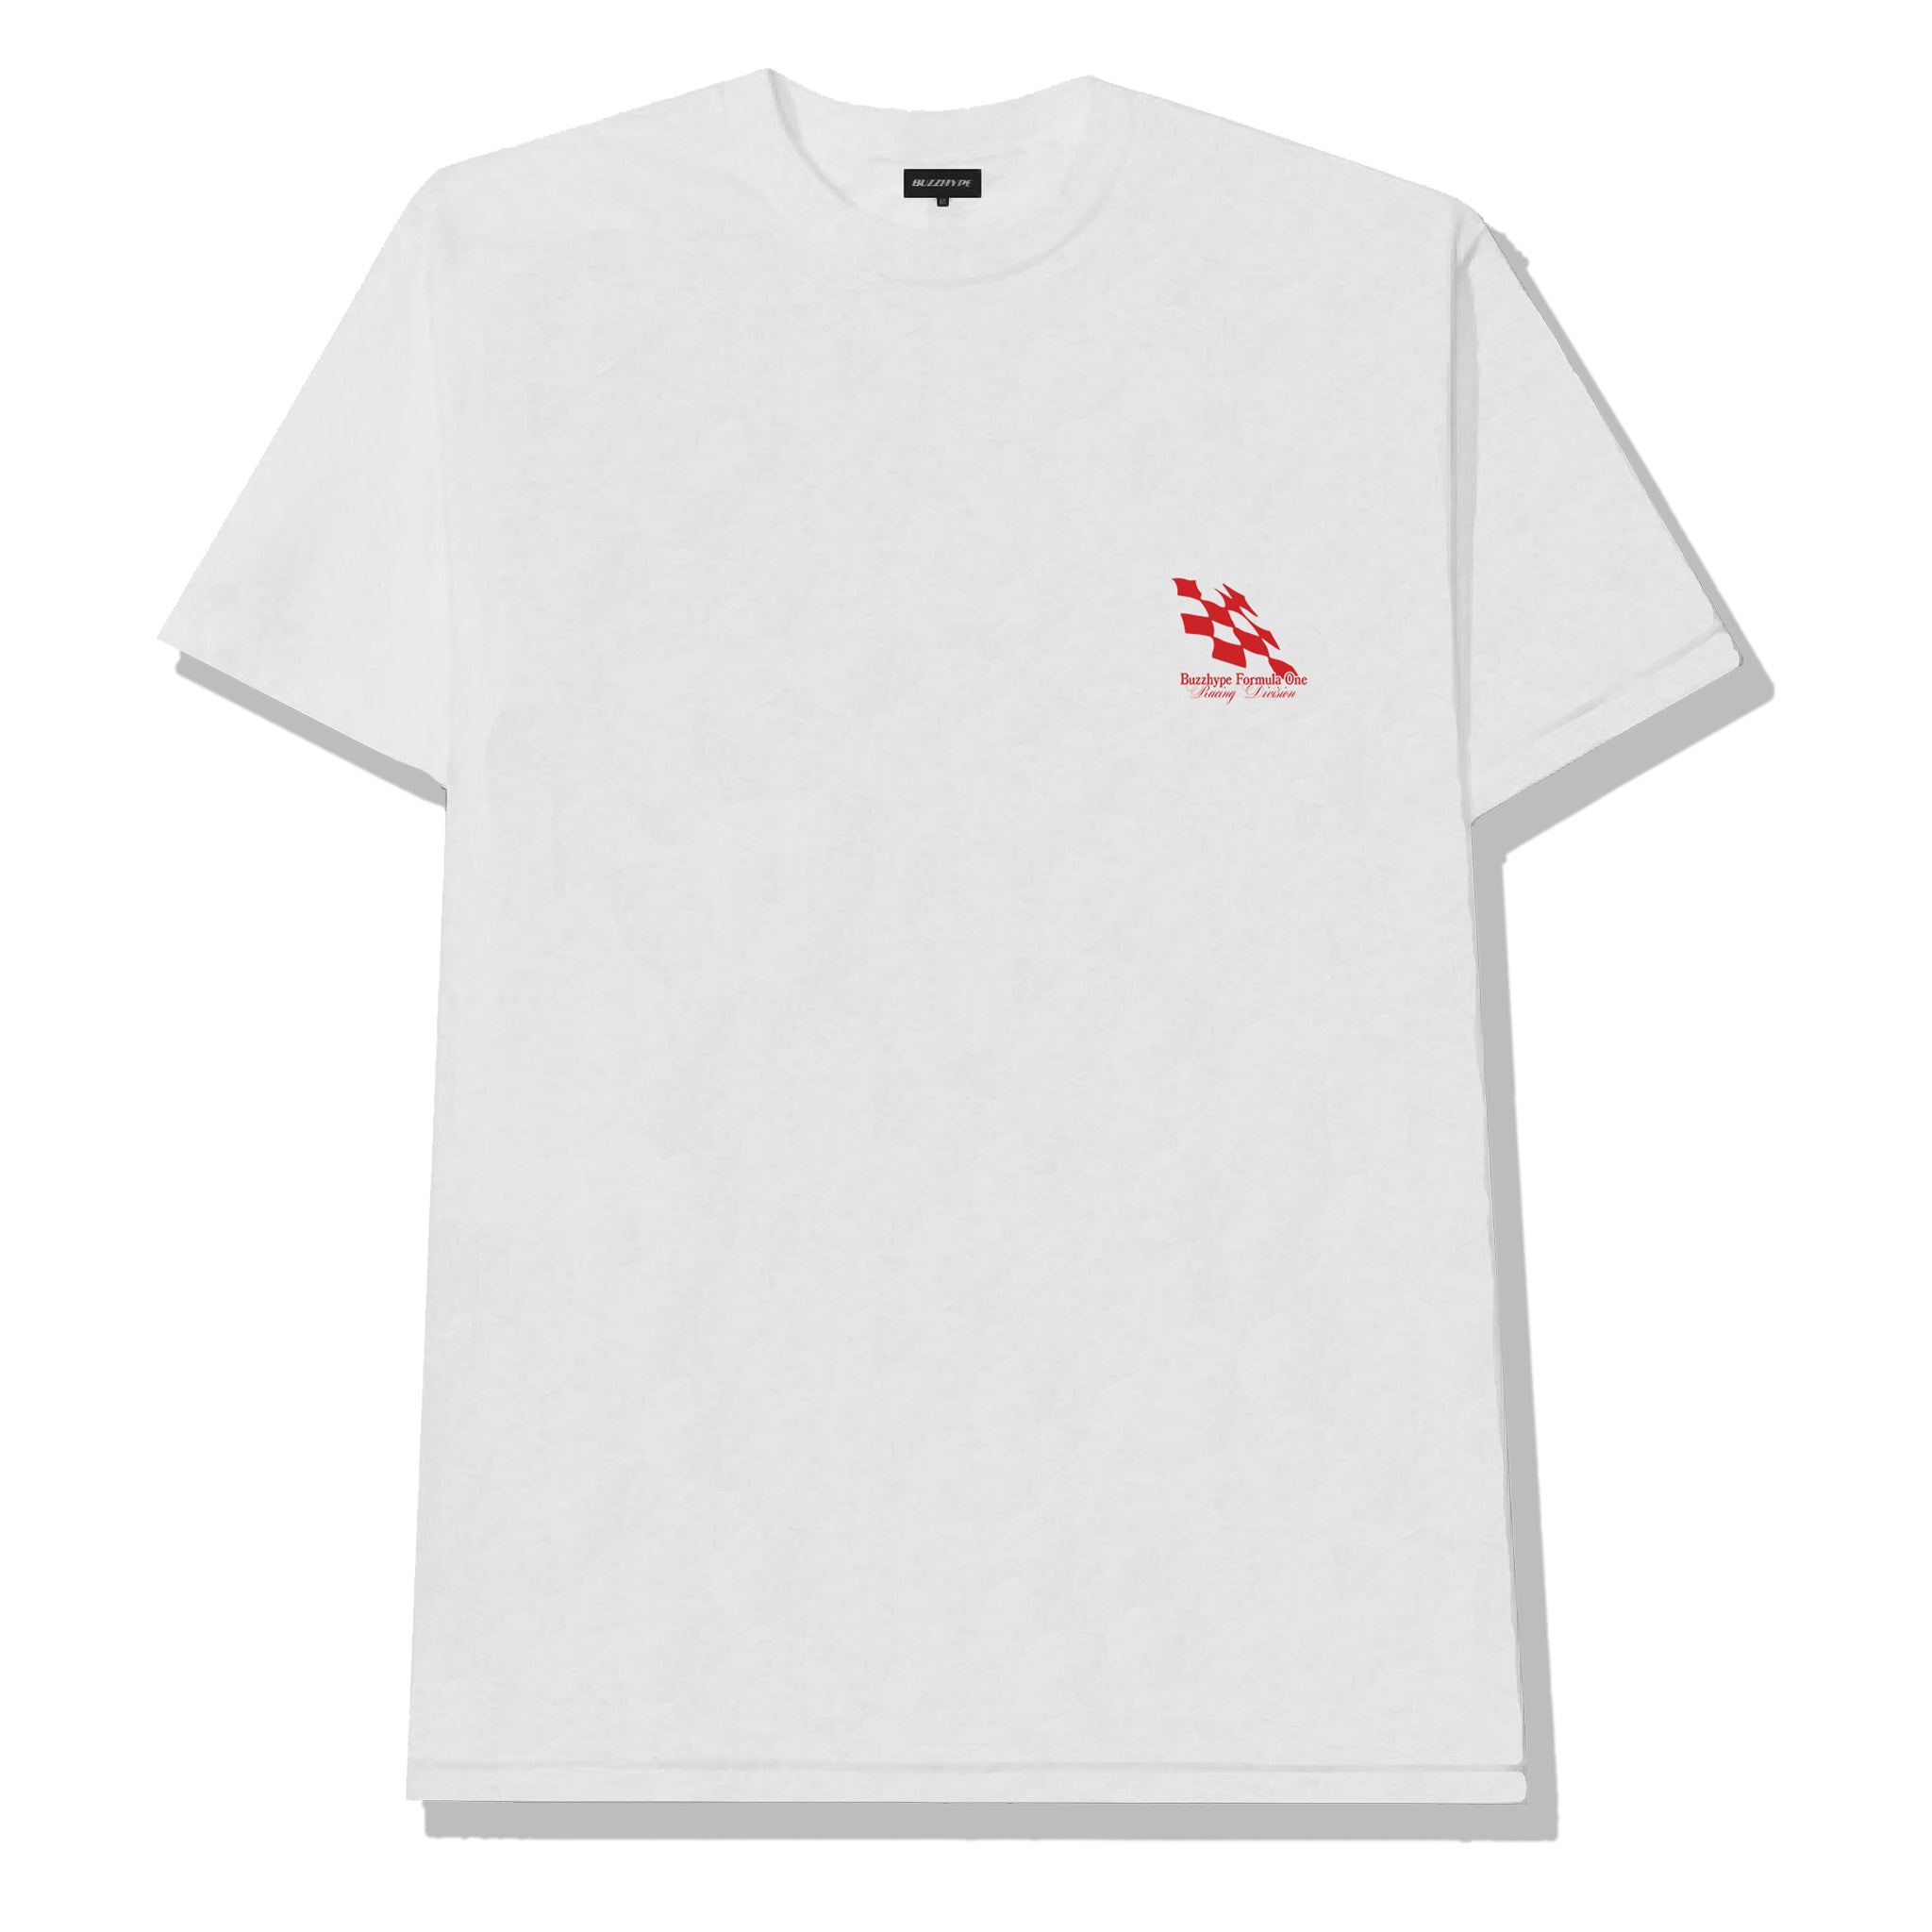 BUZZHYPE F1 In White Tee